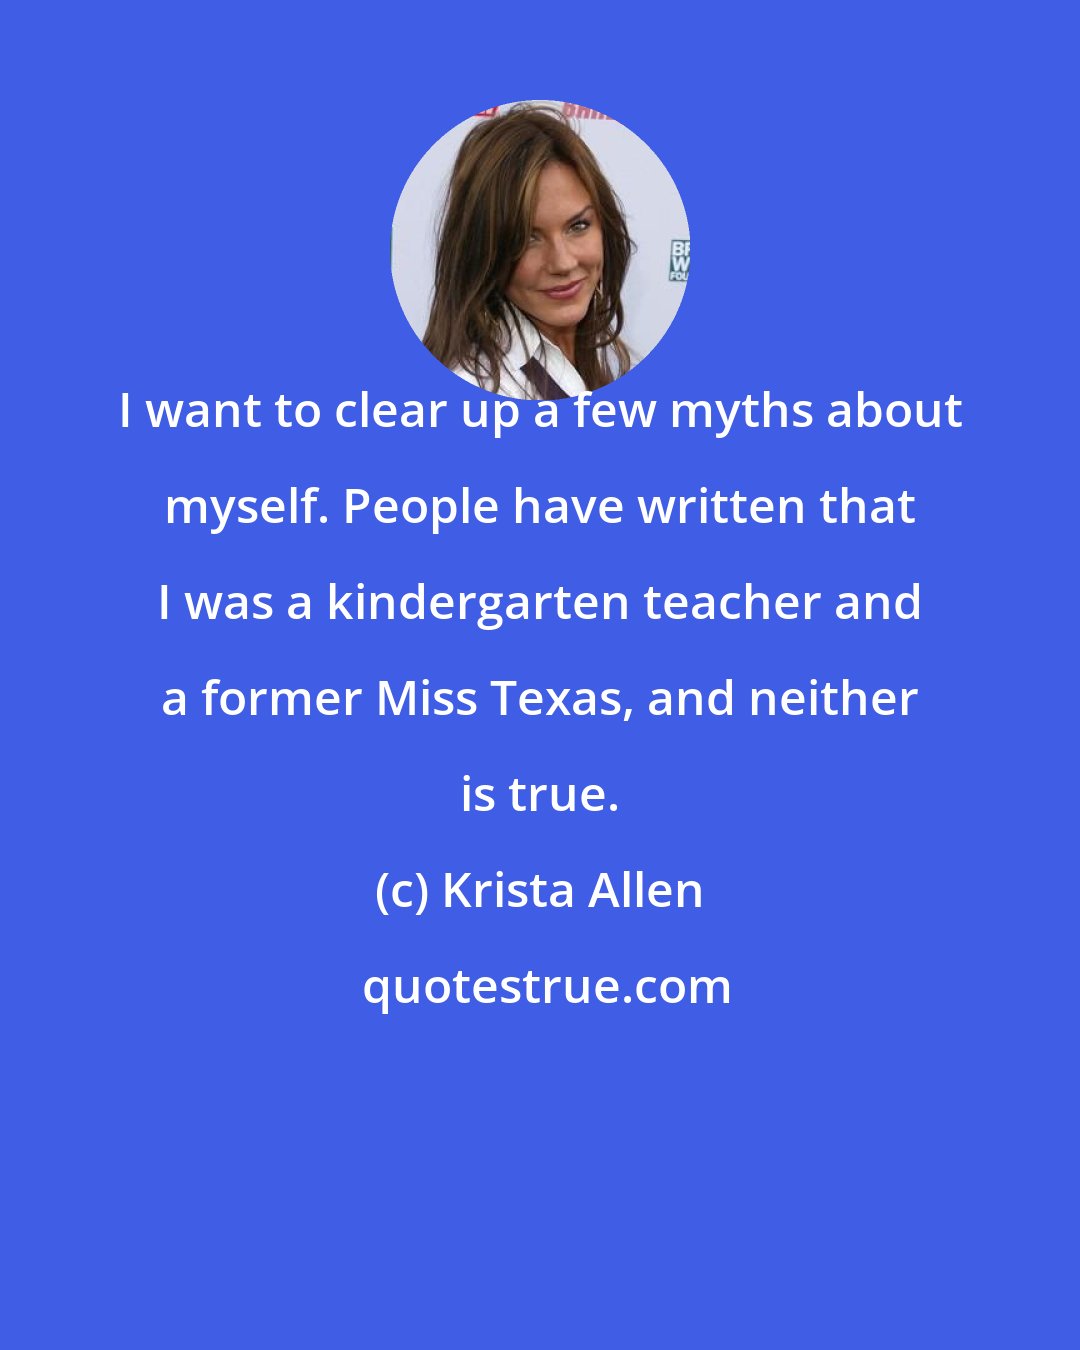 Krista Allen: I want to clear up a few myths about myself. People have written that I was a kindergarten teacher and a former Miss Texas, and neither is true.